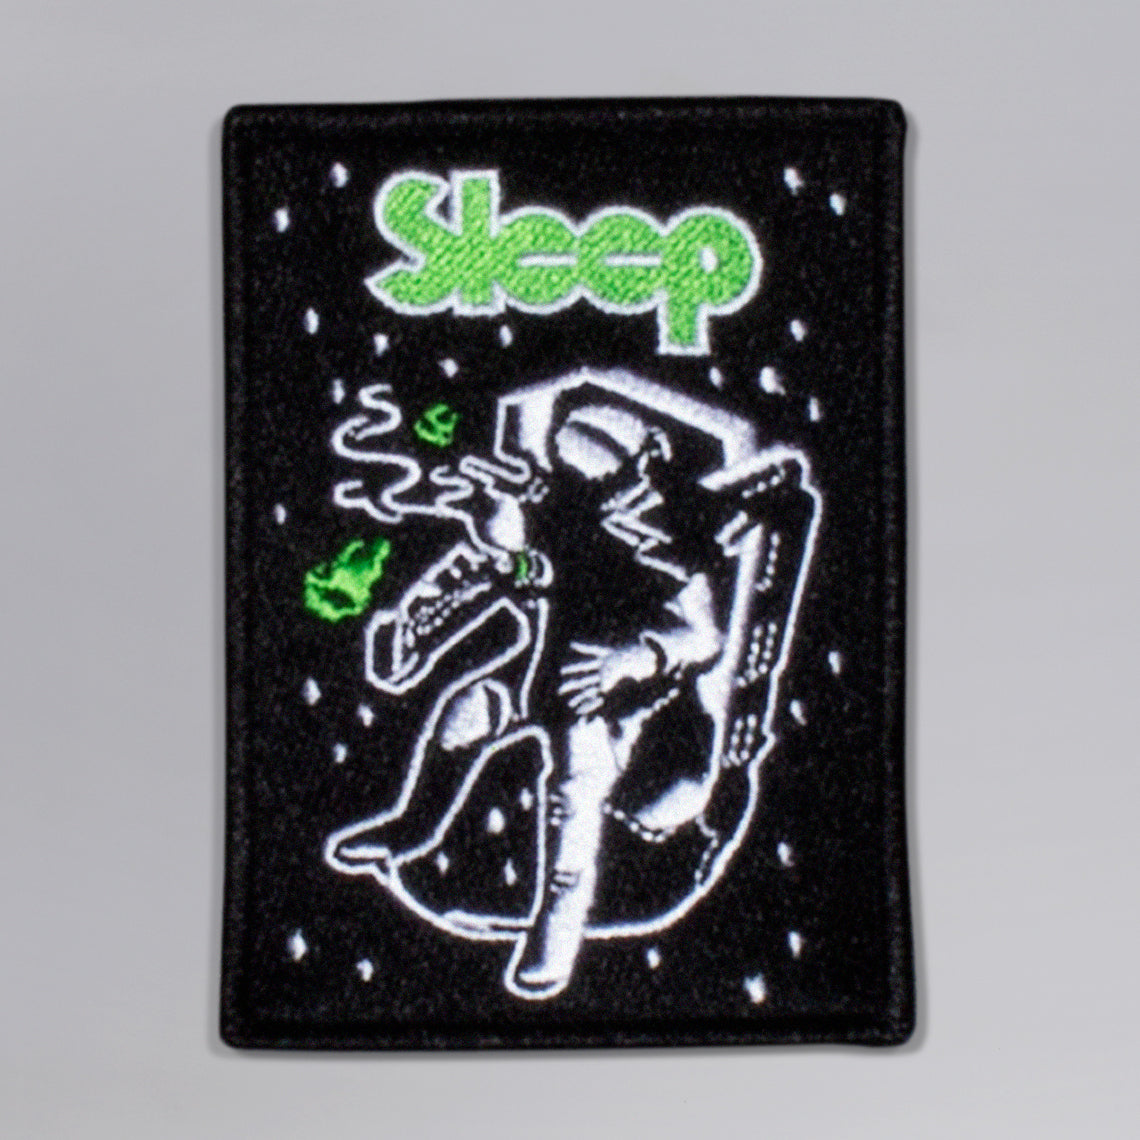 The Sciences Embroidered Patch